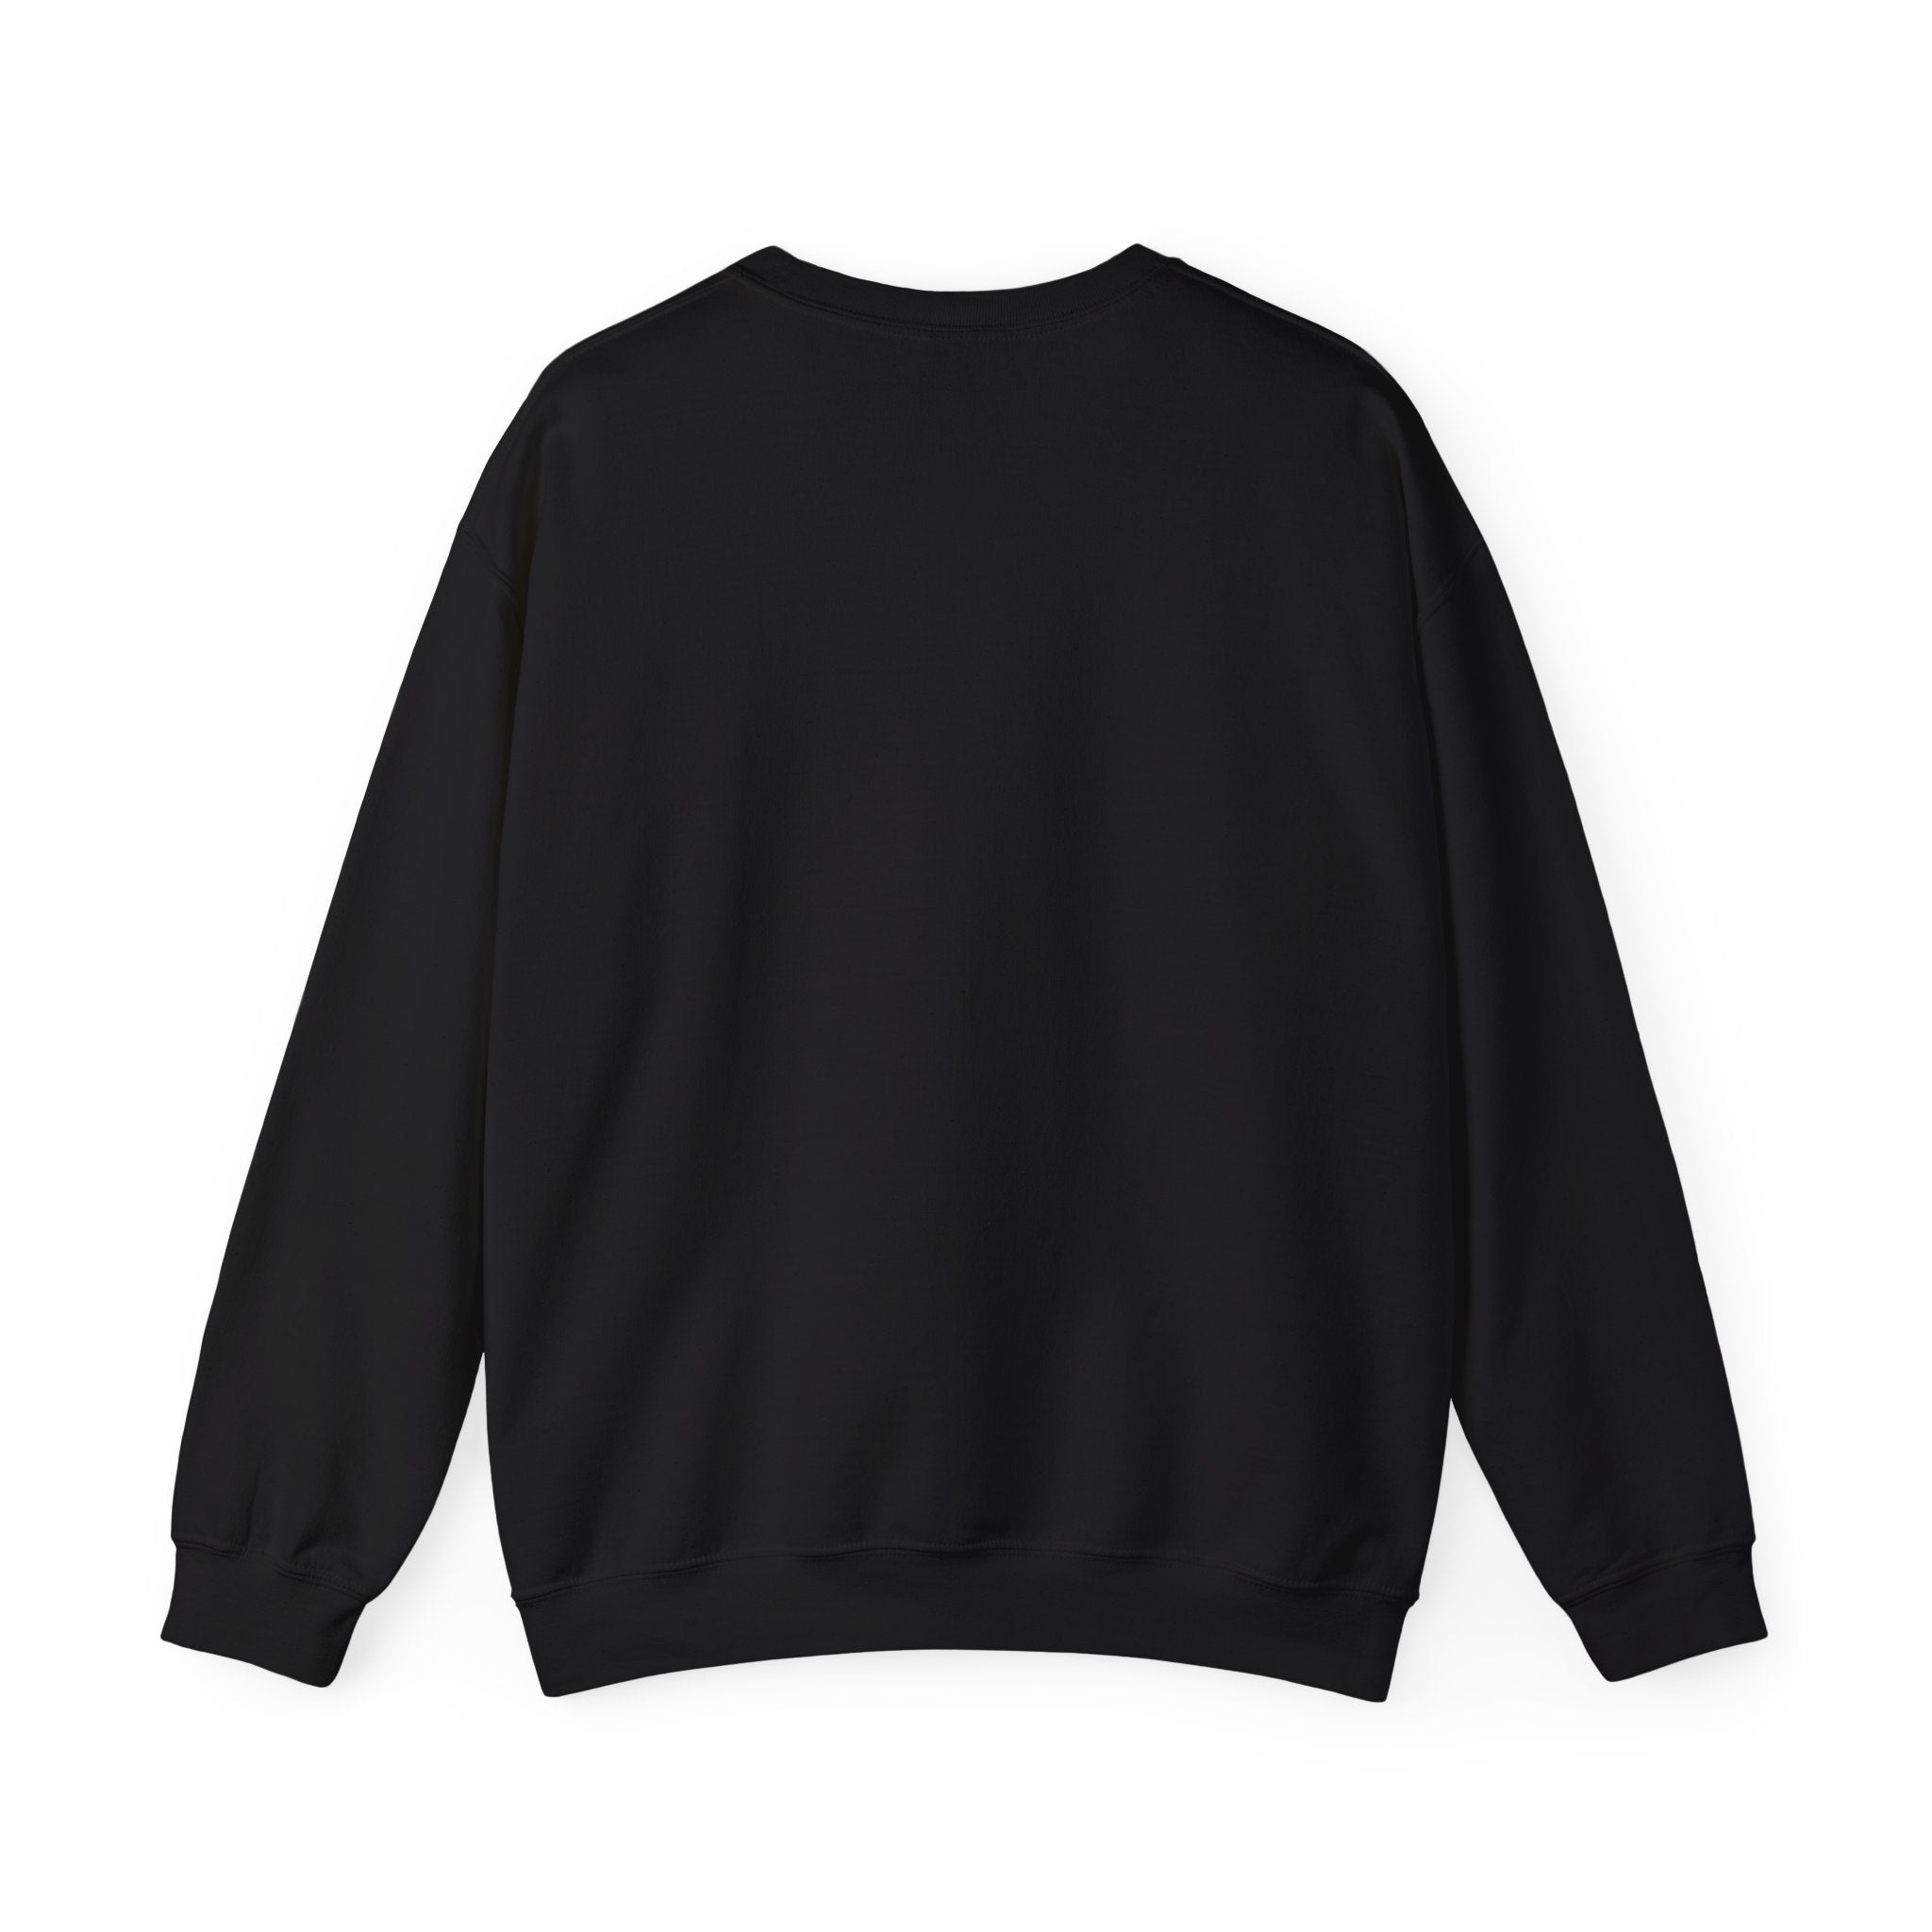 A cozy and warm black long-sleeve Father Graphic - Sweatshirt laid flat, back view visible—perfect for the colder months.